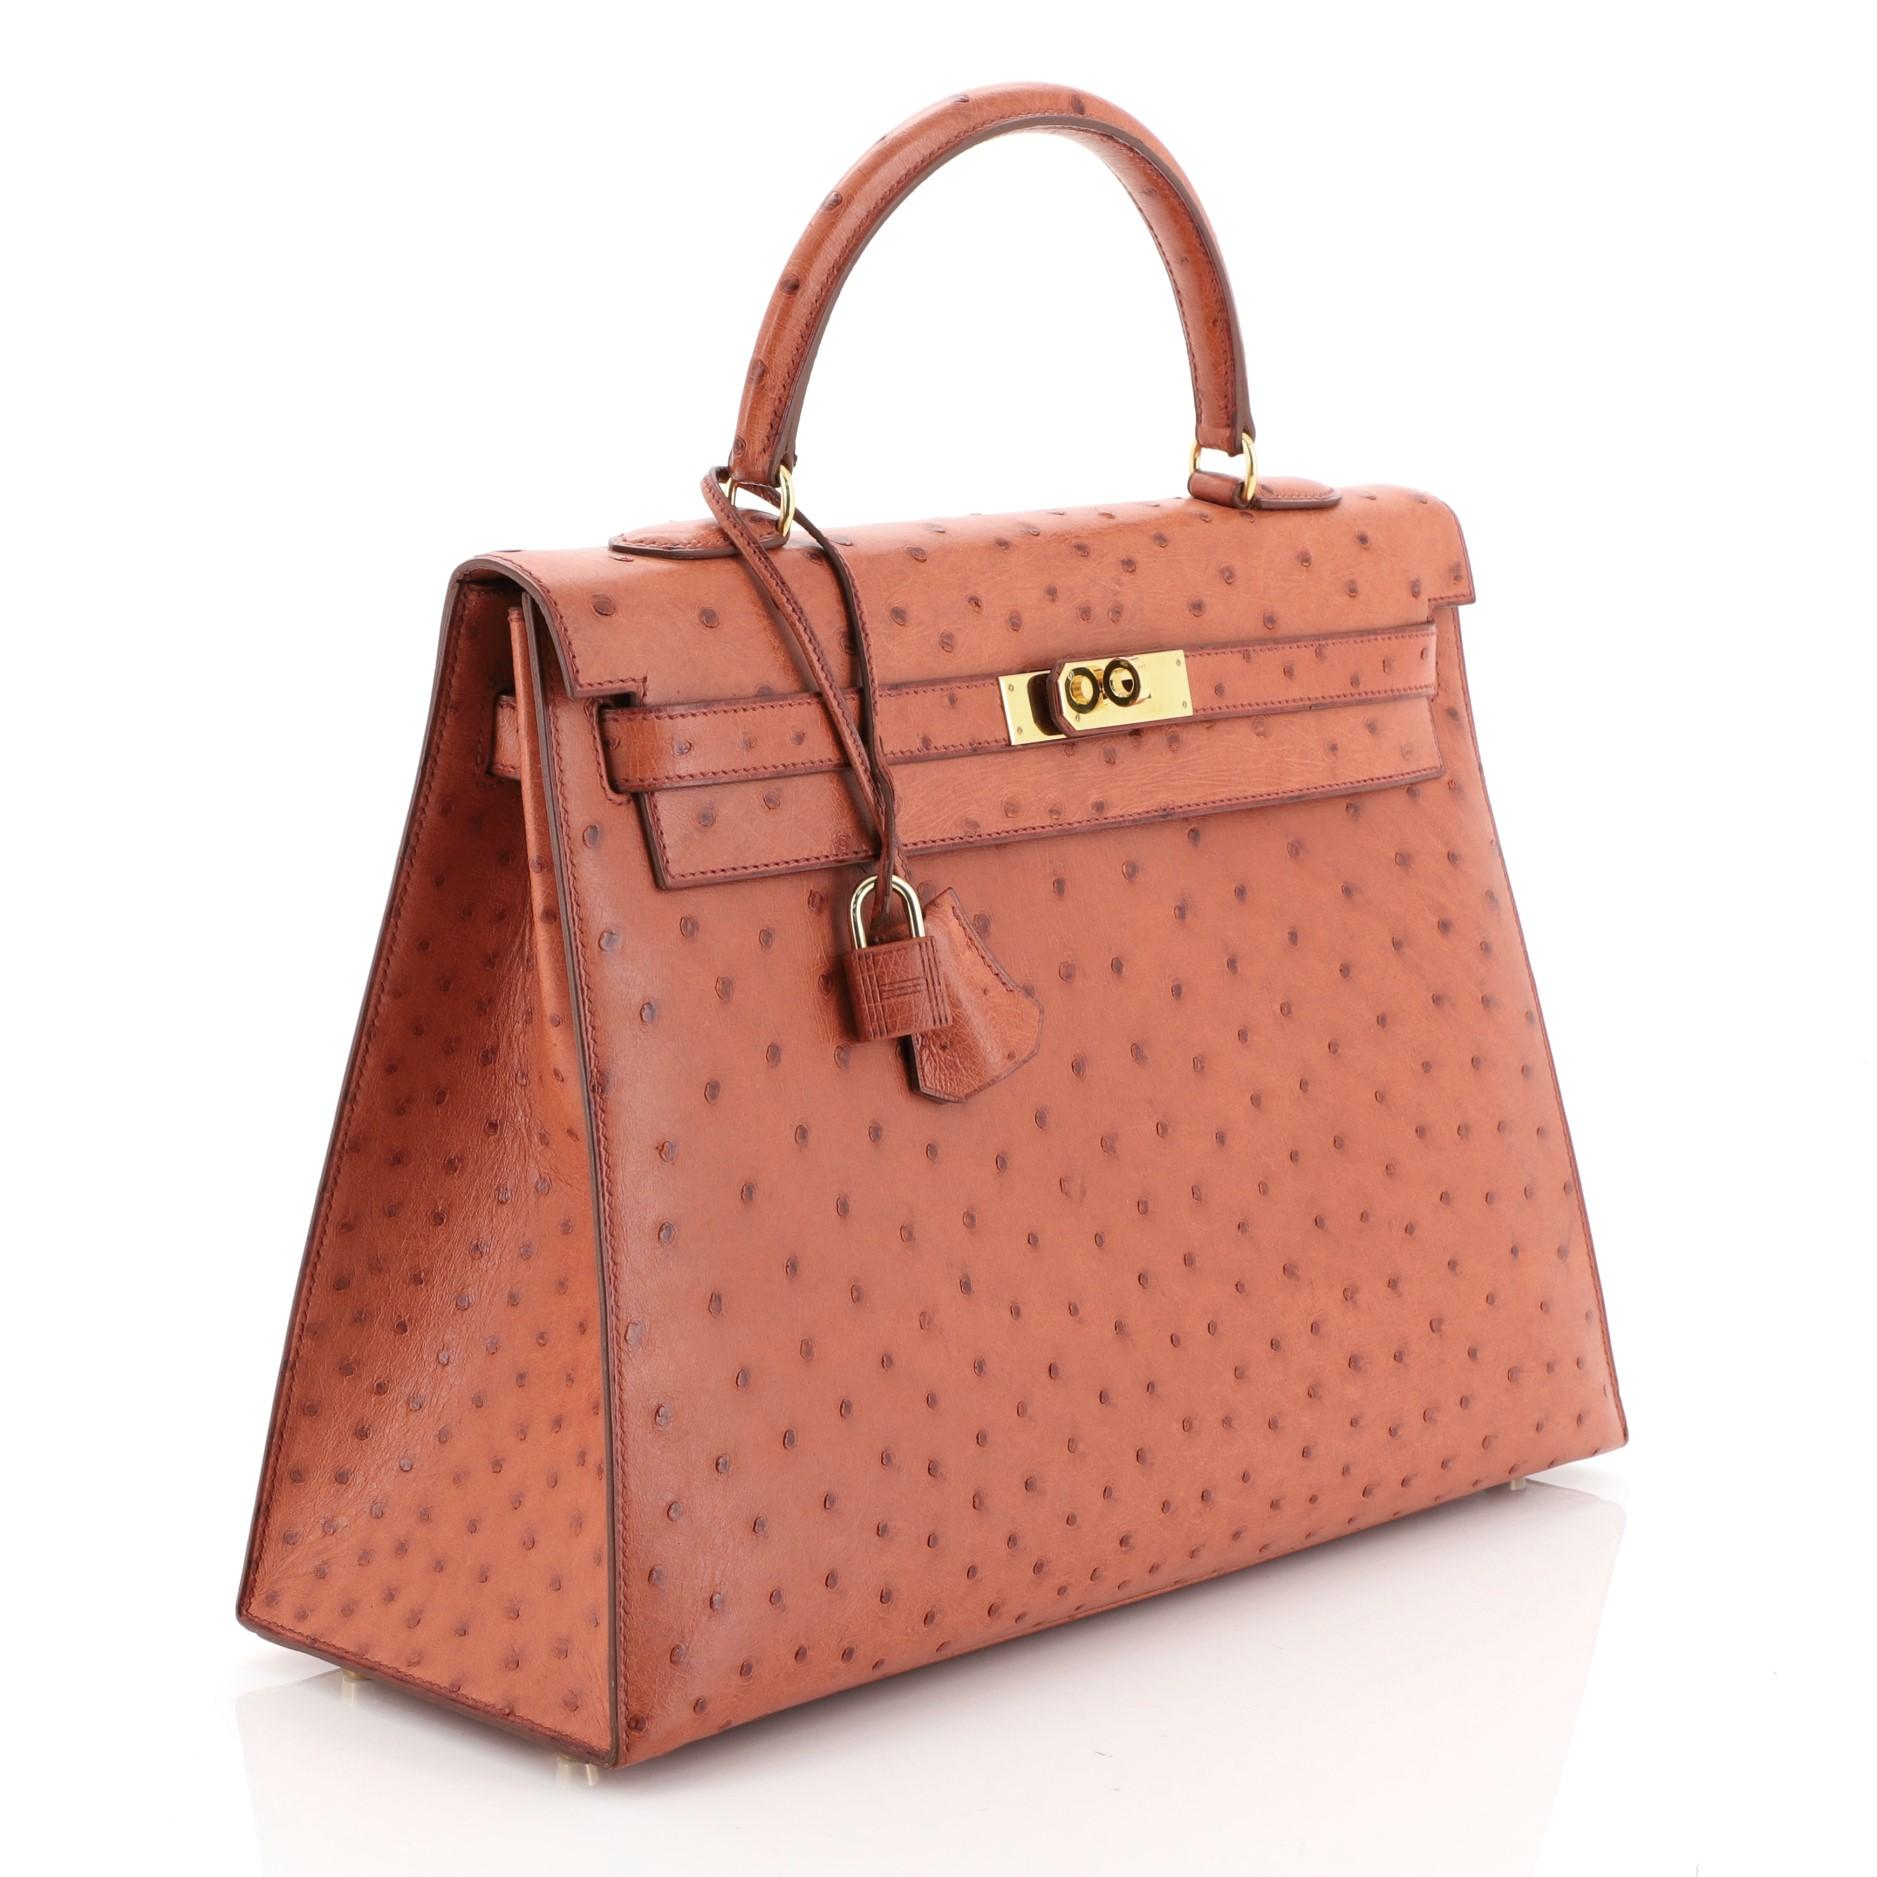 This Hermes Kelly Handbag Cognac Ostrich with Gold Hardware 35, crafted in genuine Cognac orange ostrich, features a single rolled top handle, protective base studs, and gold hardware. Its turn-lock closure opens to a Cognac orange Chevre leather